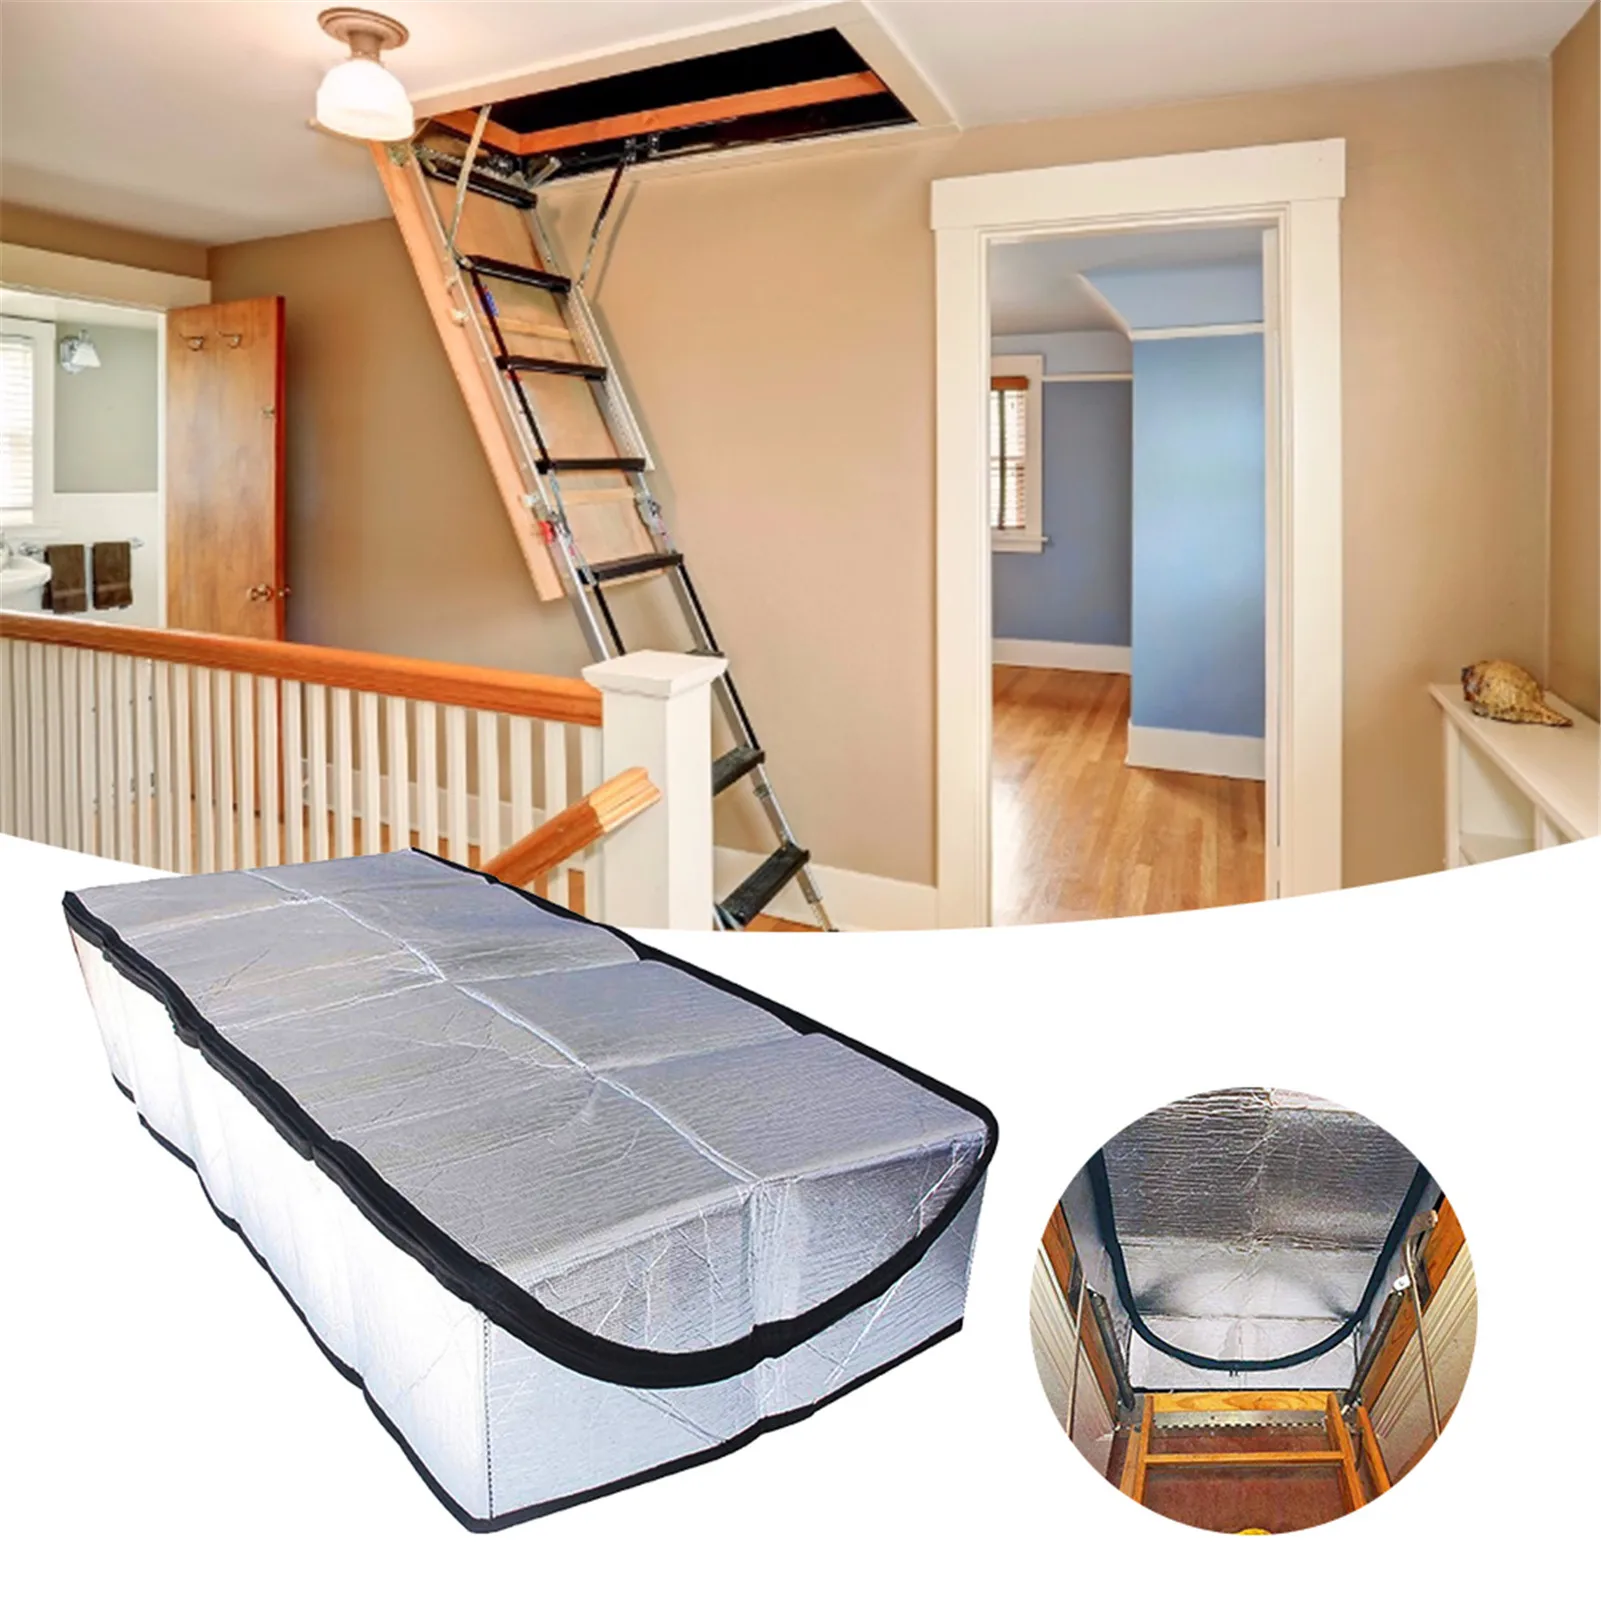 Attic Stairway Insulation Cover - Premium Energy Saving Attic Stairs Door  Ladder Insulator Pull Down Tent with Zipper 25 in x 54 in x 11In (Attic  Cover) 